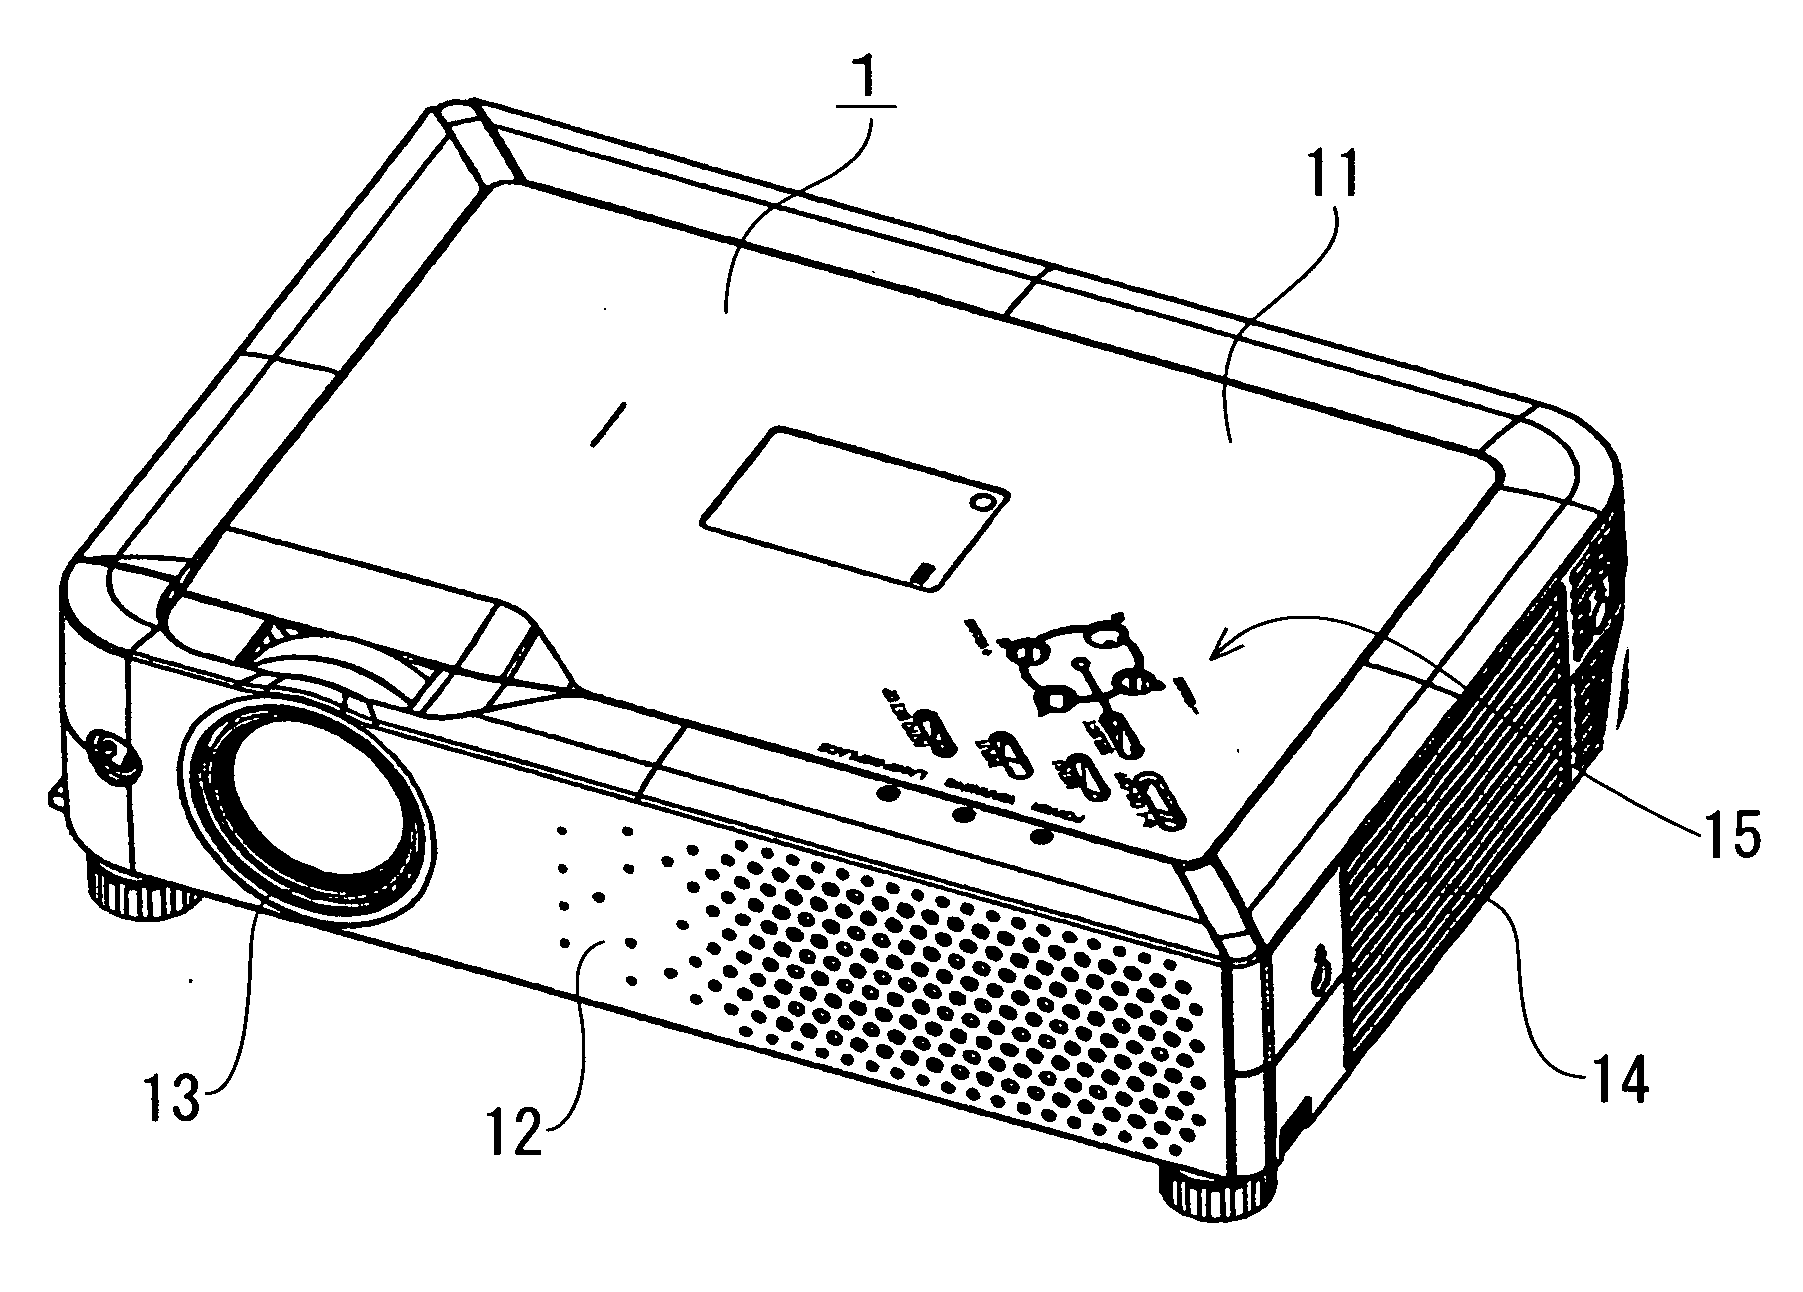 Projector device